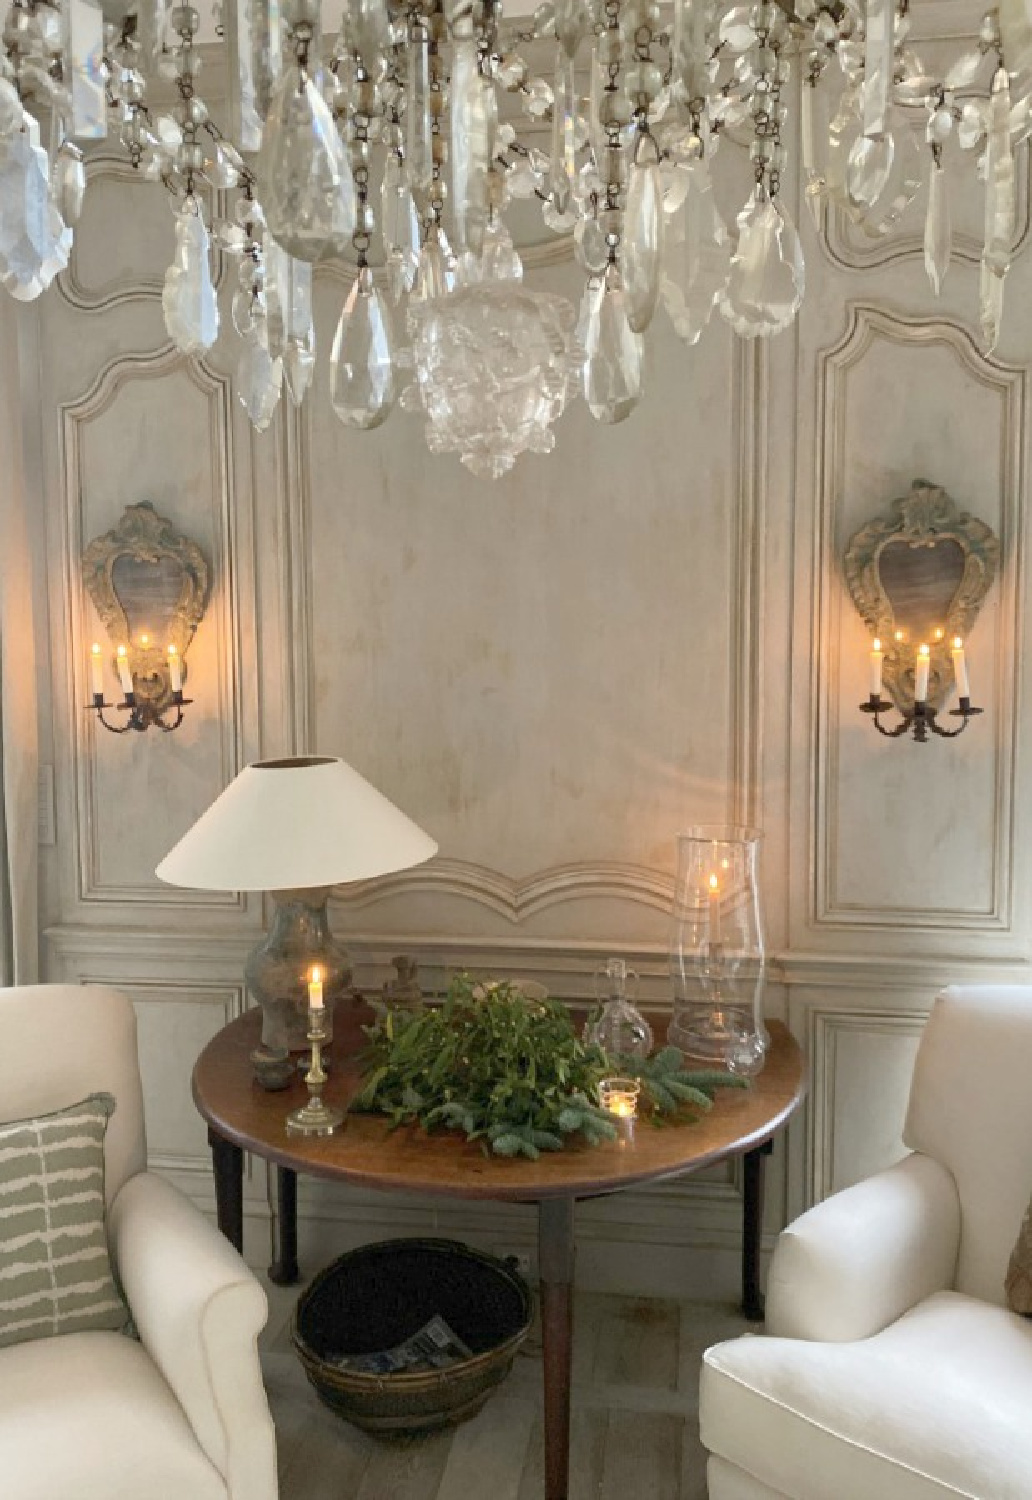 Beautiful Belgian style in an elegant paneled sitting area with white chairs and candle sconces - Greet Lefevre of Belgian Pearls. #belgianstyle #belgianchristmas